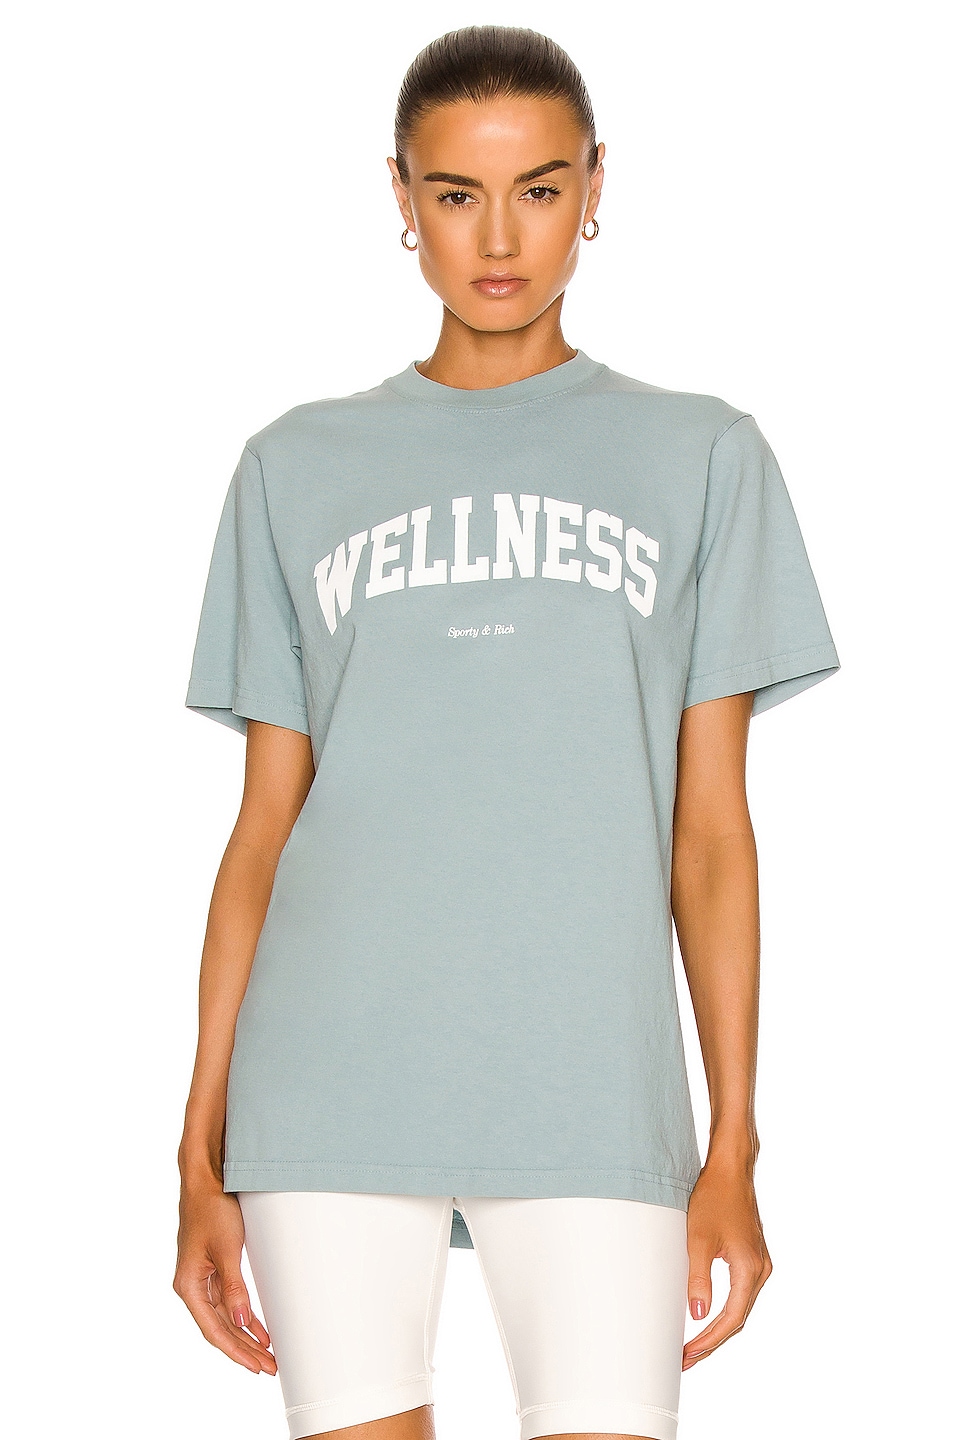 Image 1 of Sporty & Rich Wellness Tee in Soft Blue & White